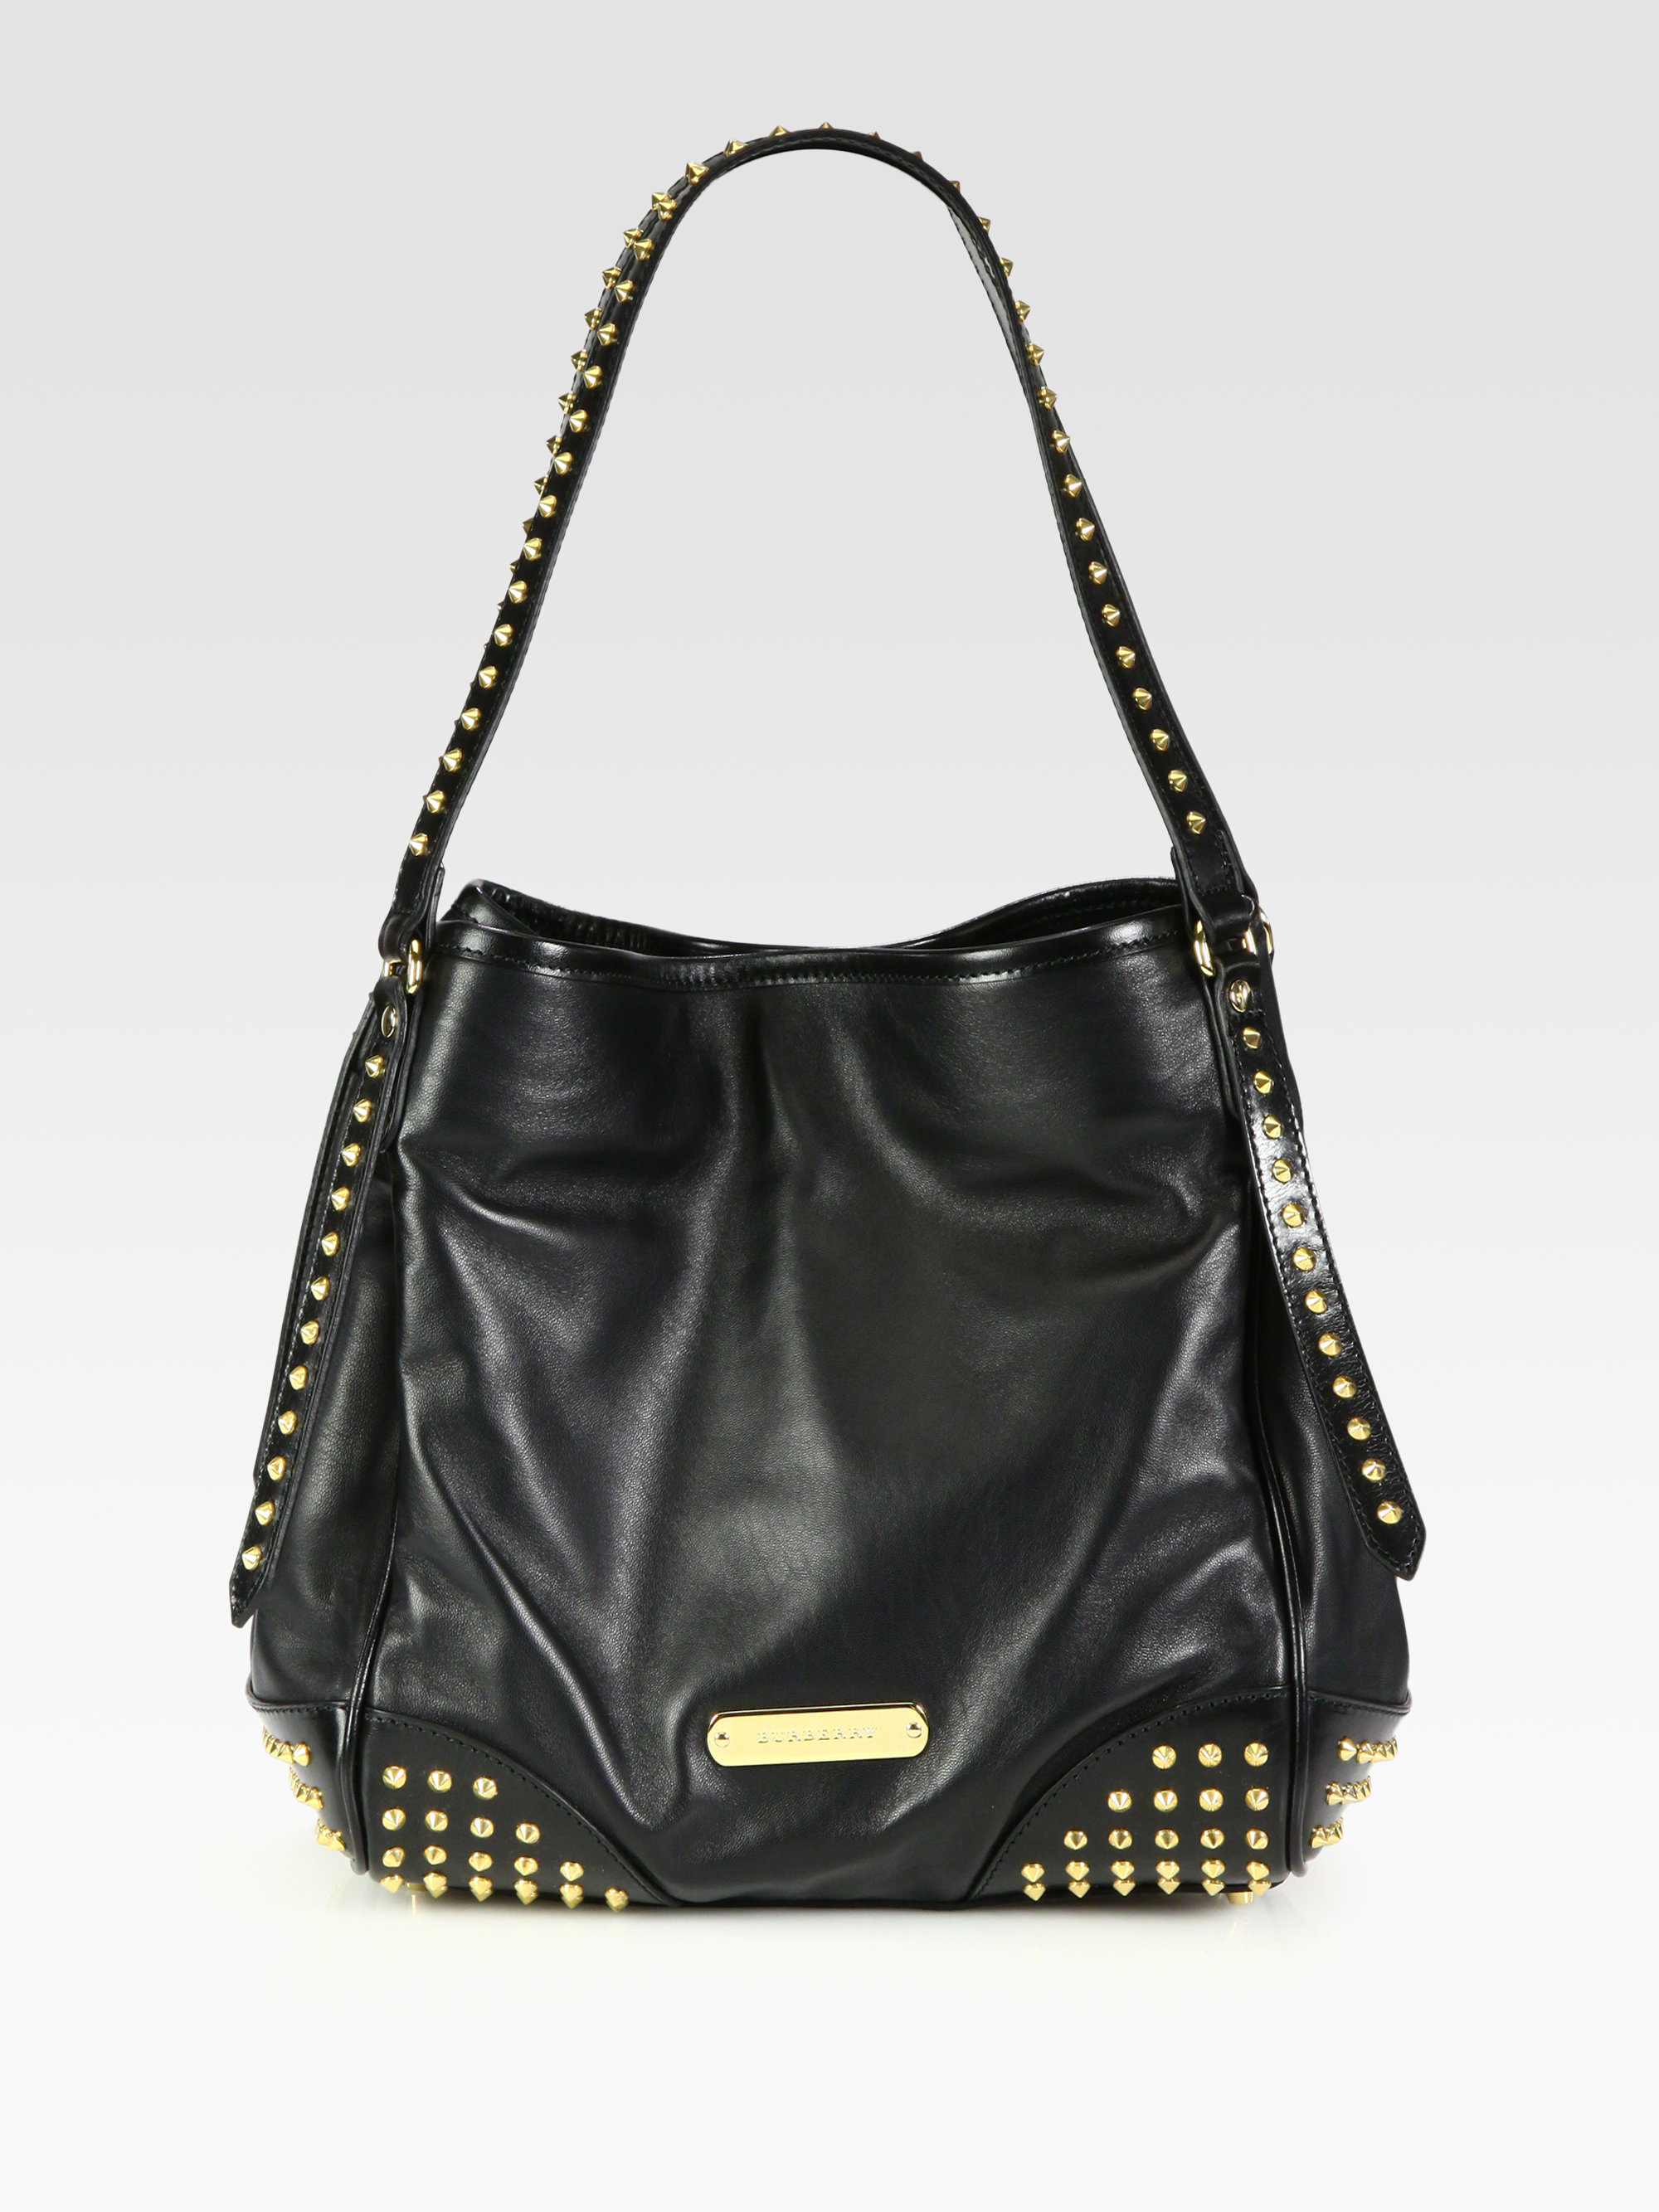 Burberry Studded Tote in Black - Lyst